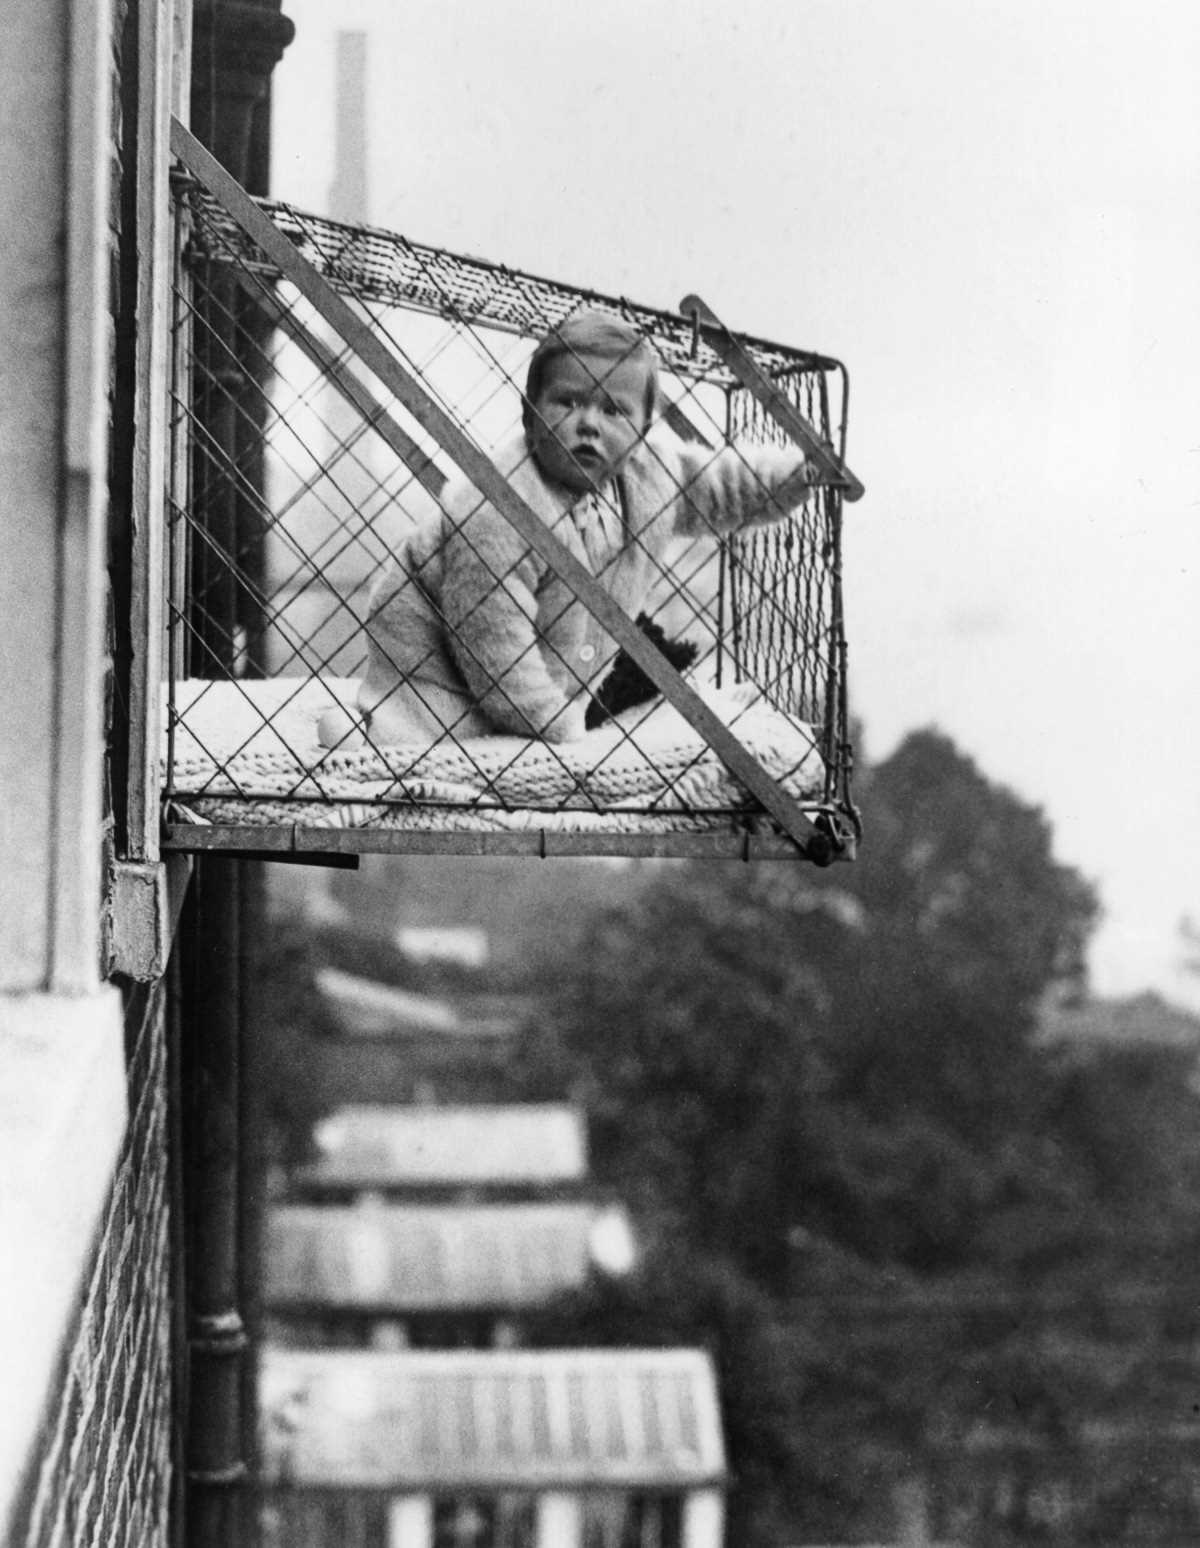 vintage photo of a baby cage